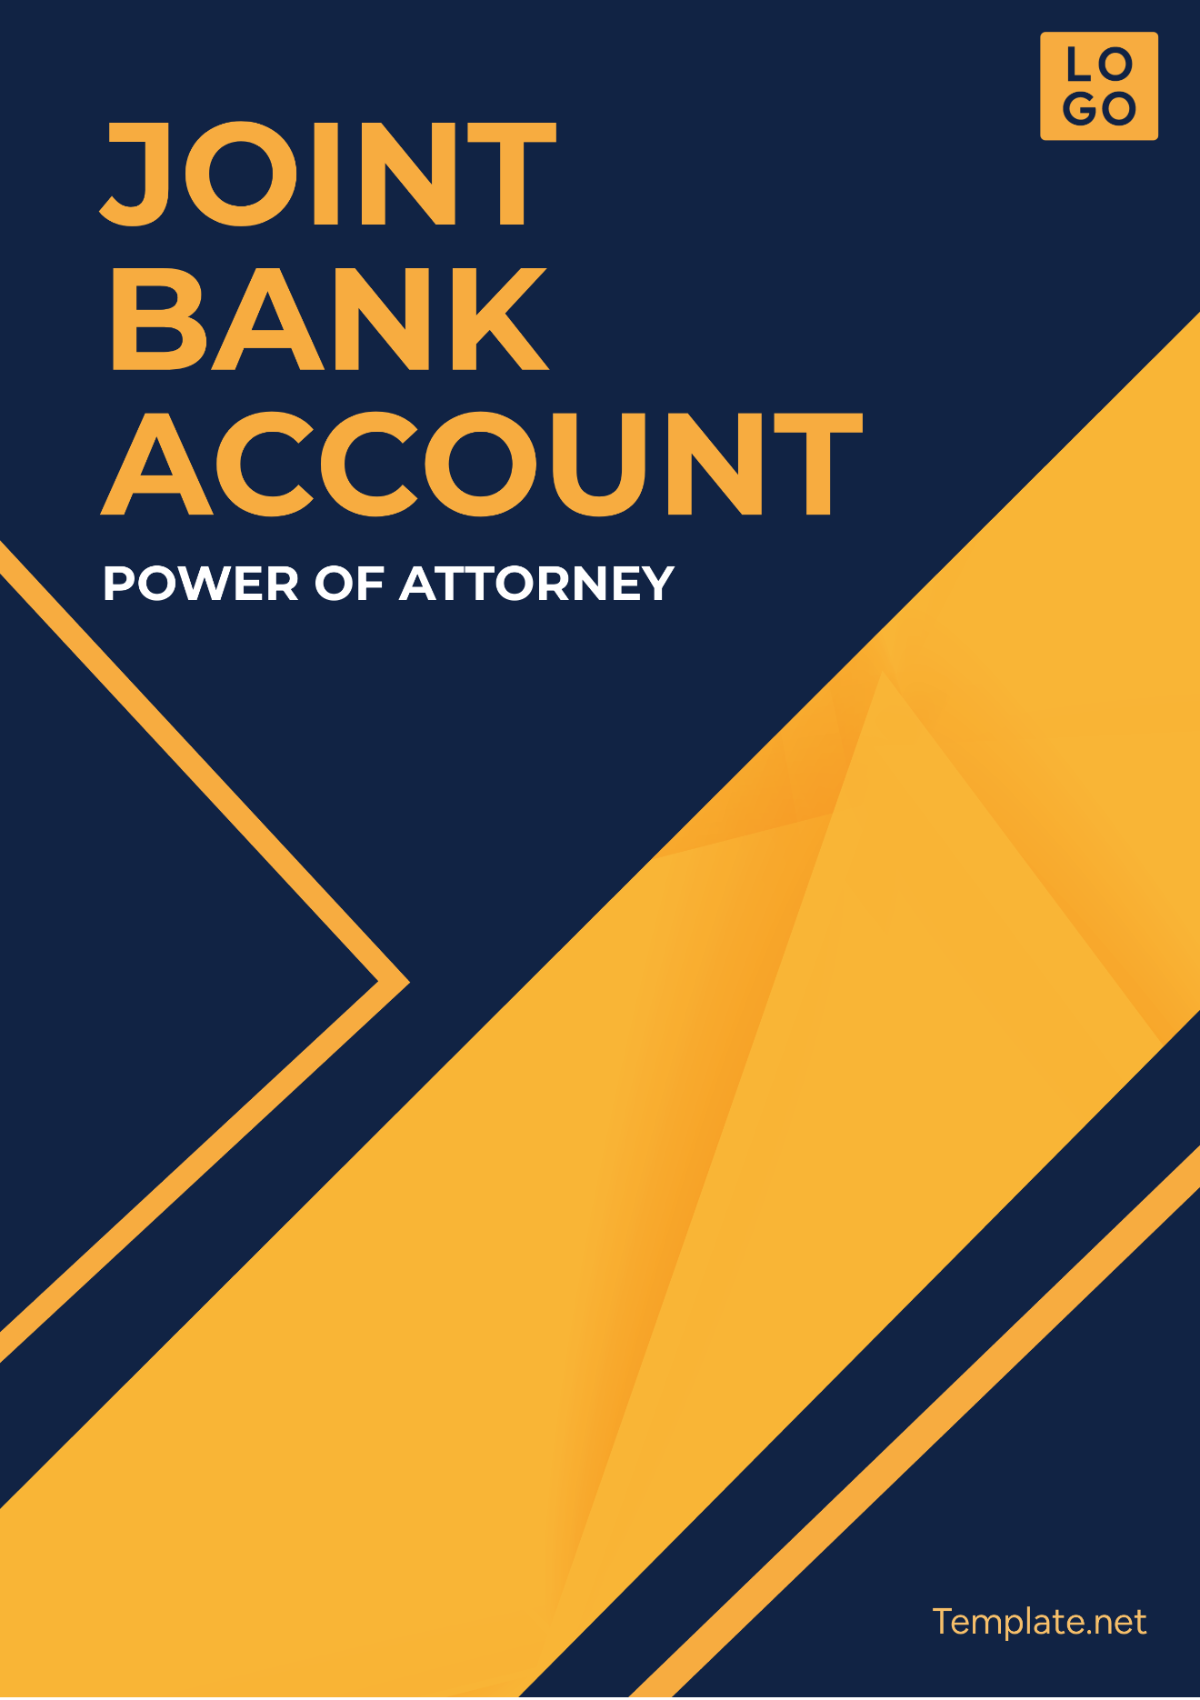 Joint Bank Account Power of Attorney Template